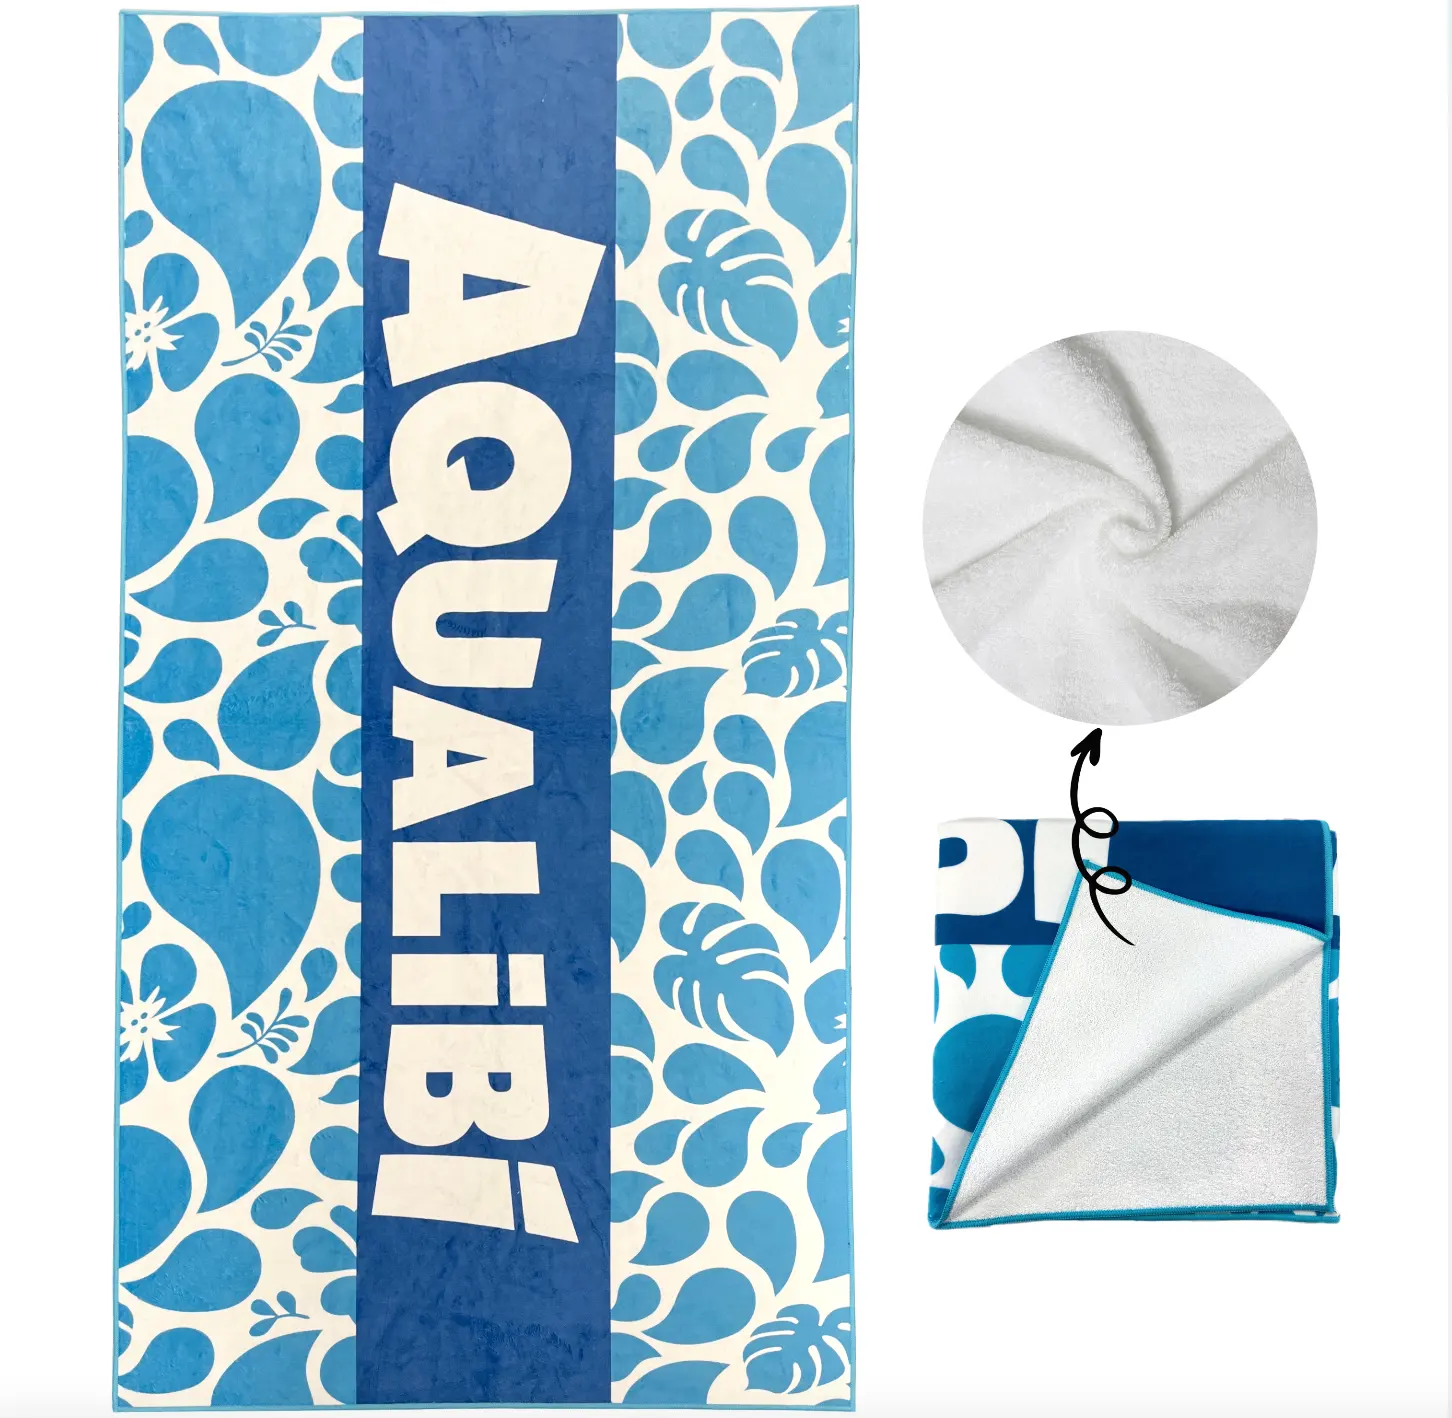 Low MOQ Custom your logo design cotton and polyester material Digital printed beach towel with gift box